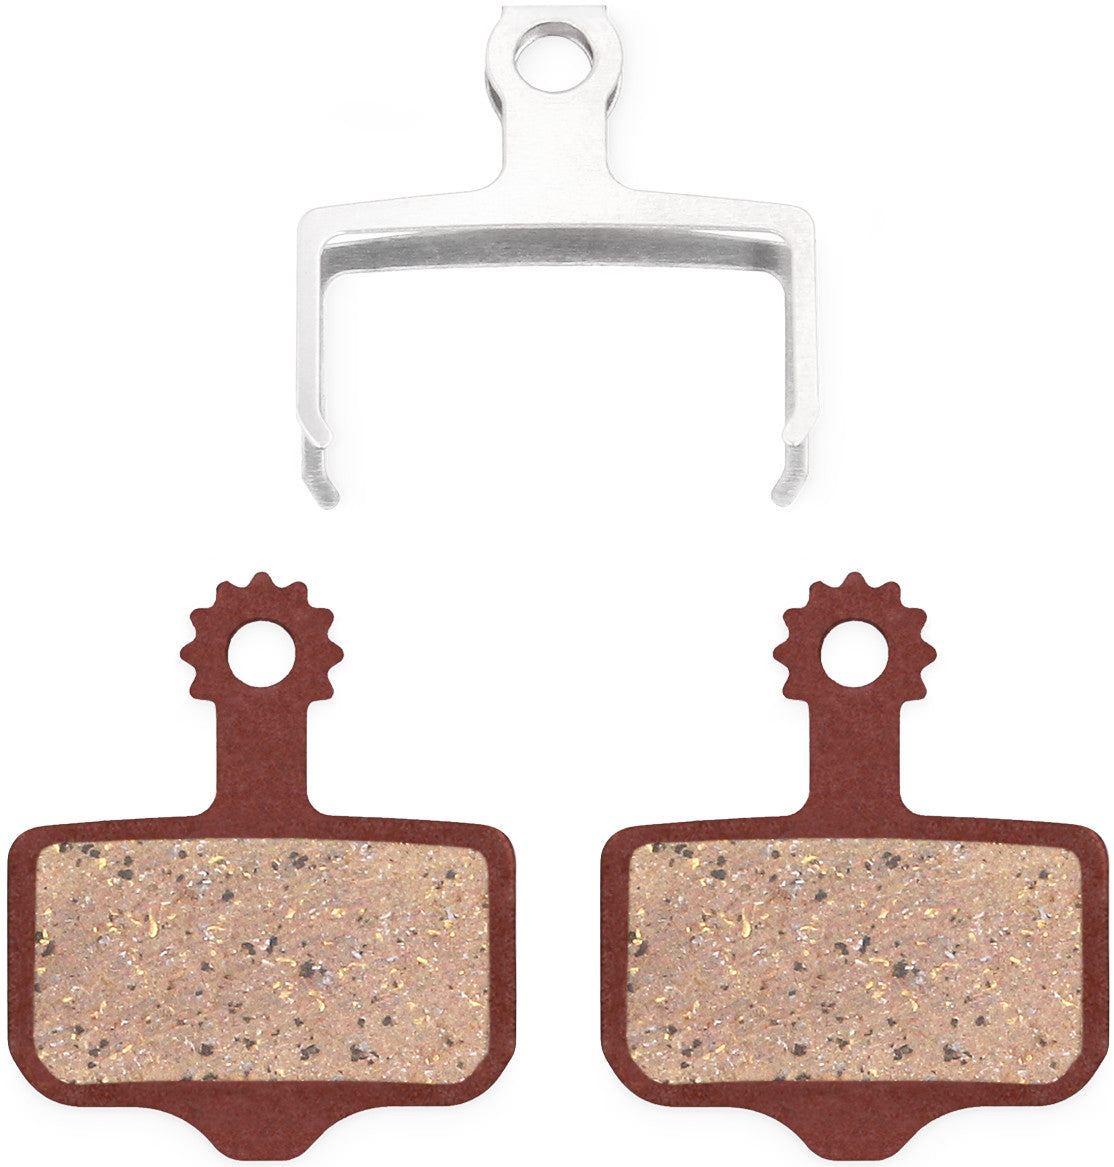 Frictive FR205R Resin Pads for SRAM Level | also Avid Elixir (2 piston), DB, Force, TL | Organic | Disc Brake Pads